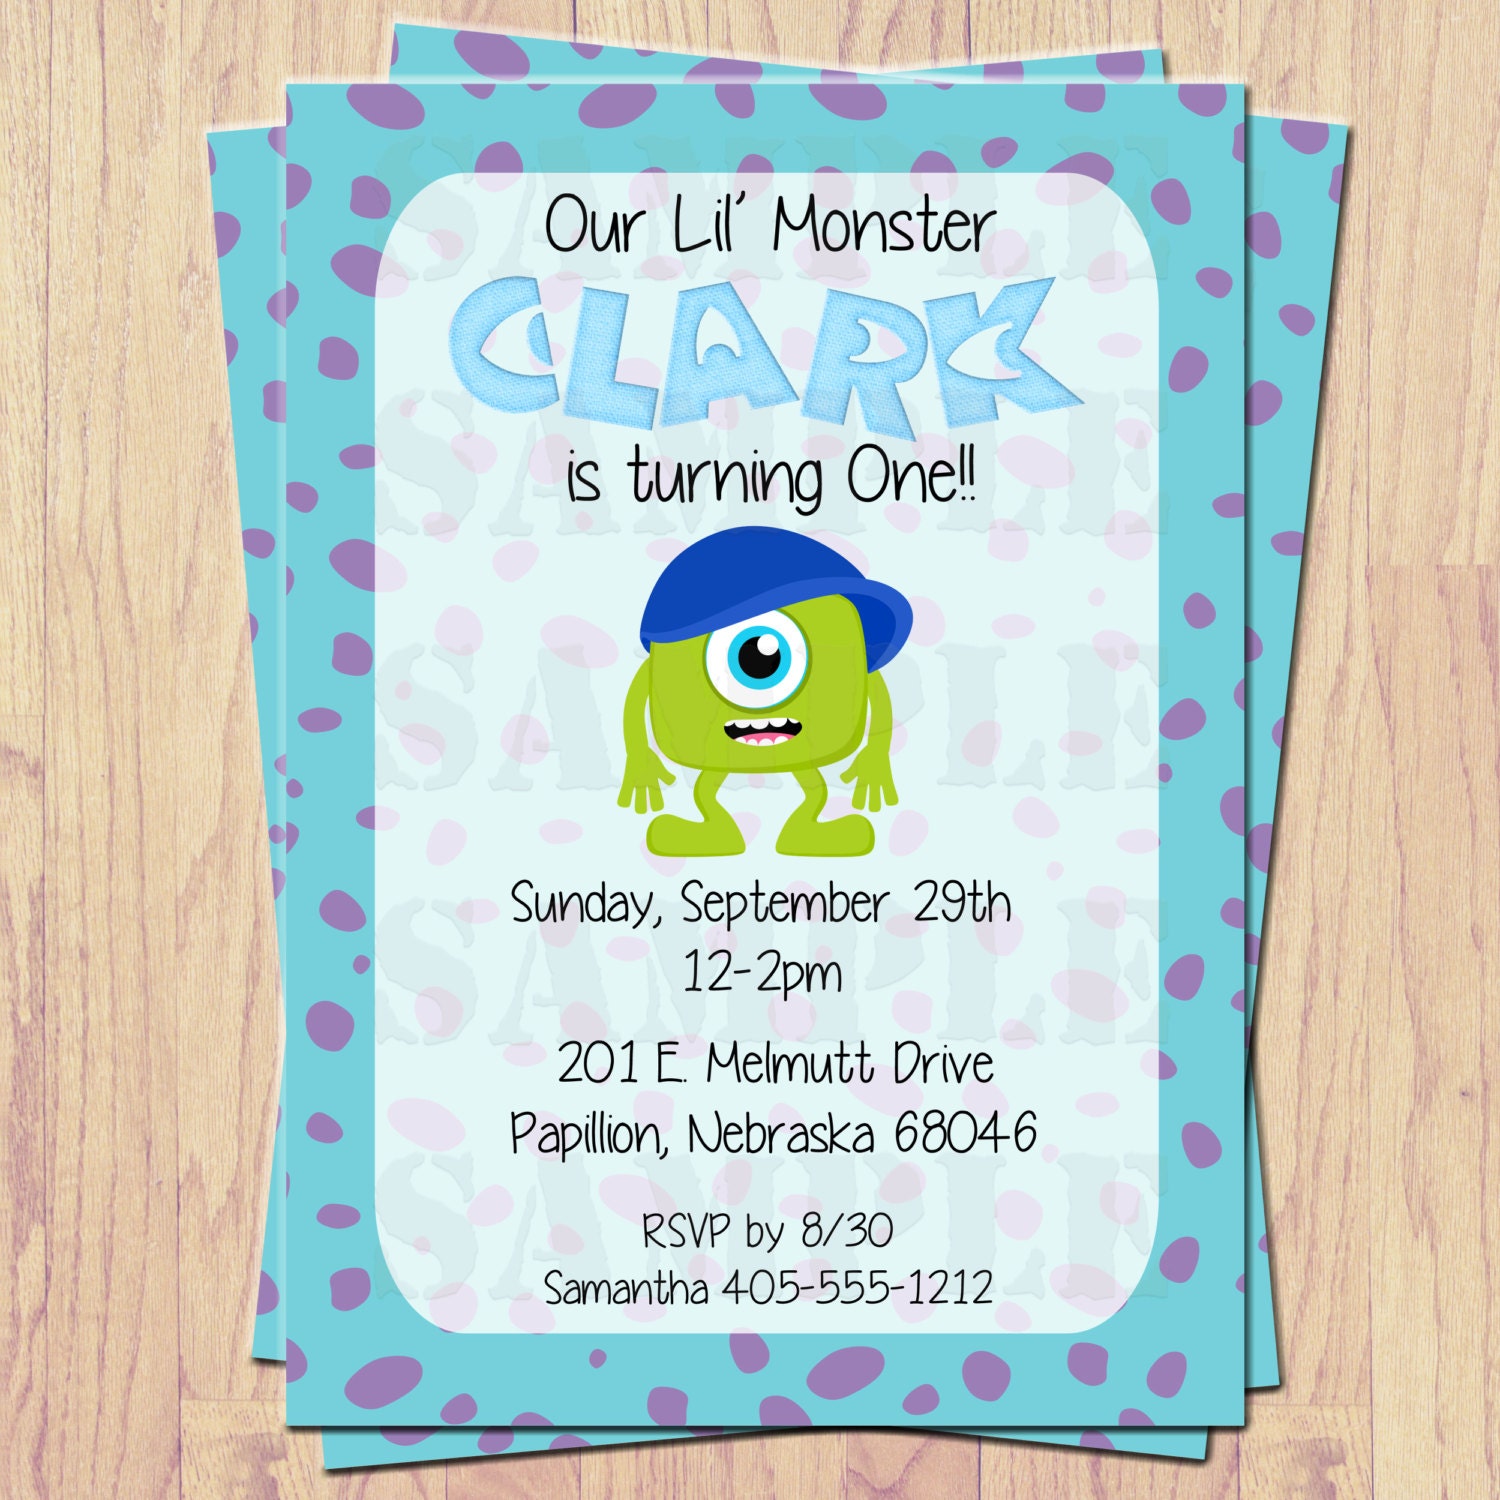 Free Party Invitations To Print At Home 6